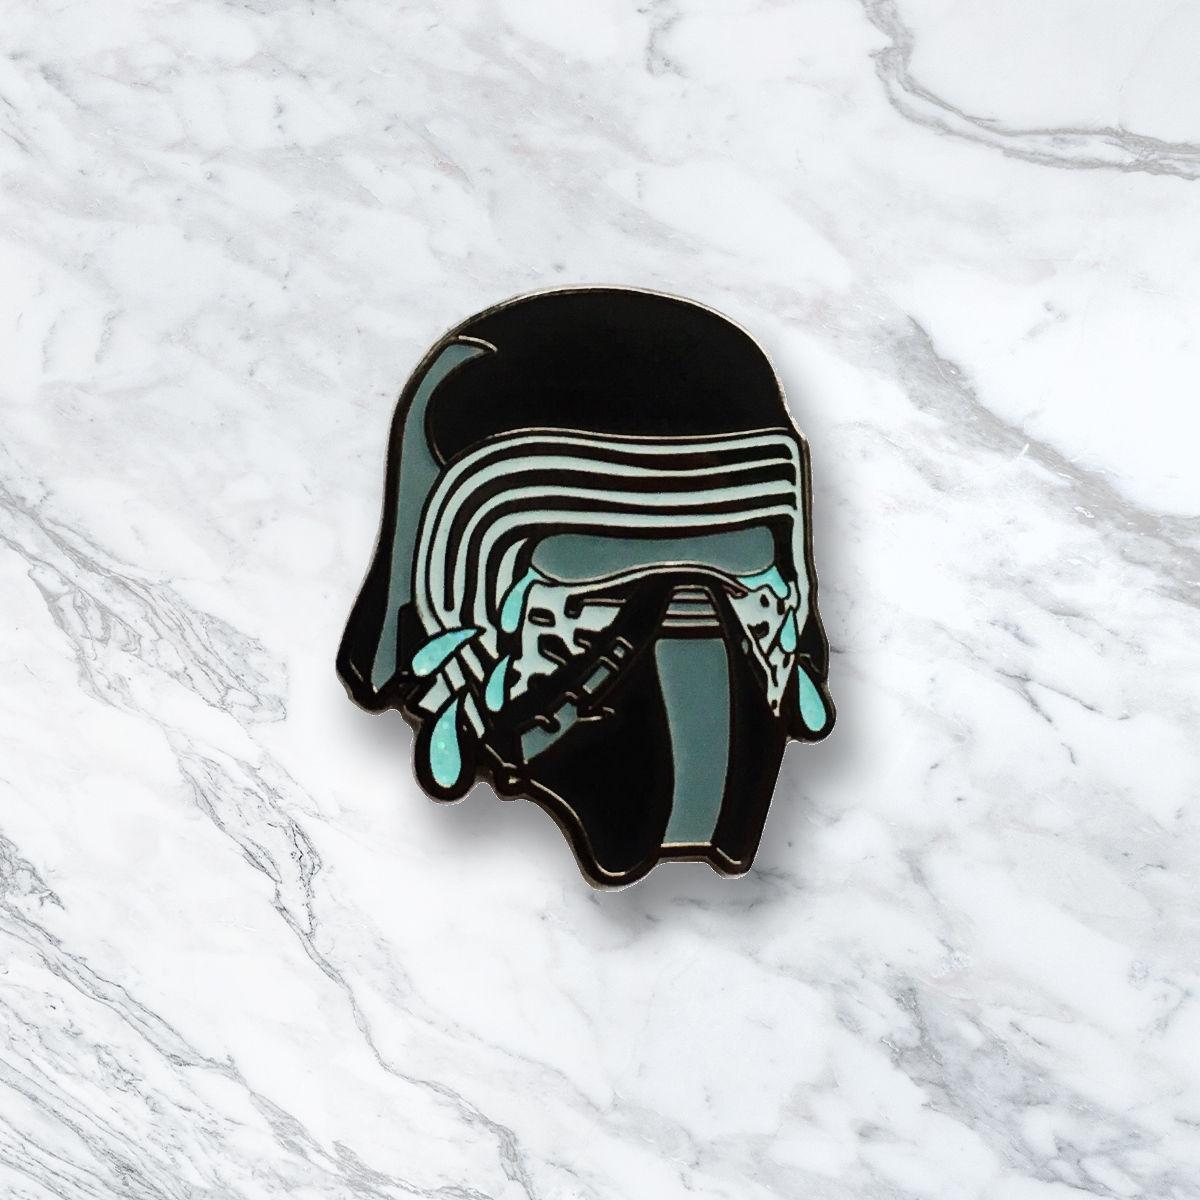 Kylo / Crylo Ren Lapel Pin from Pinlord